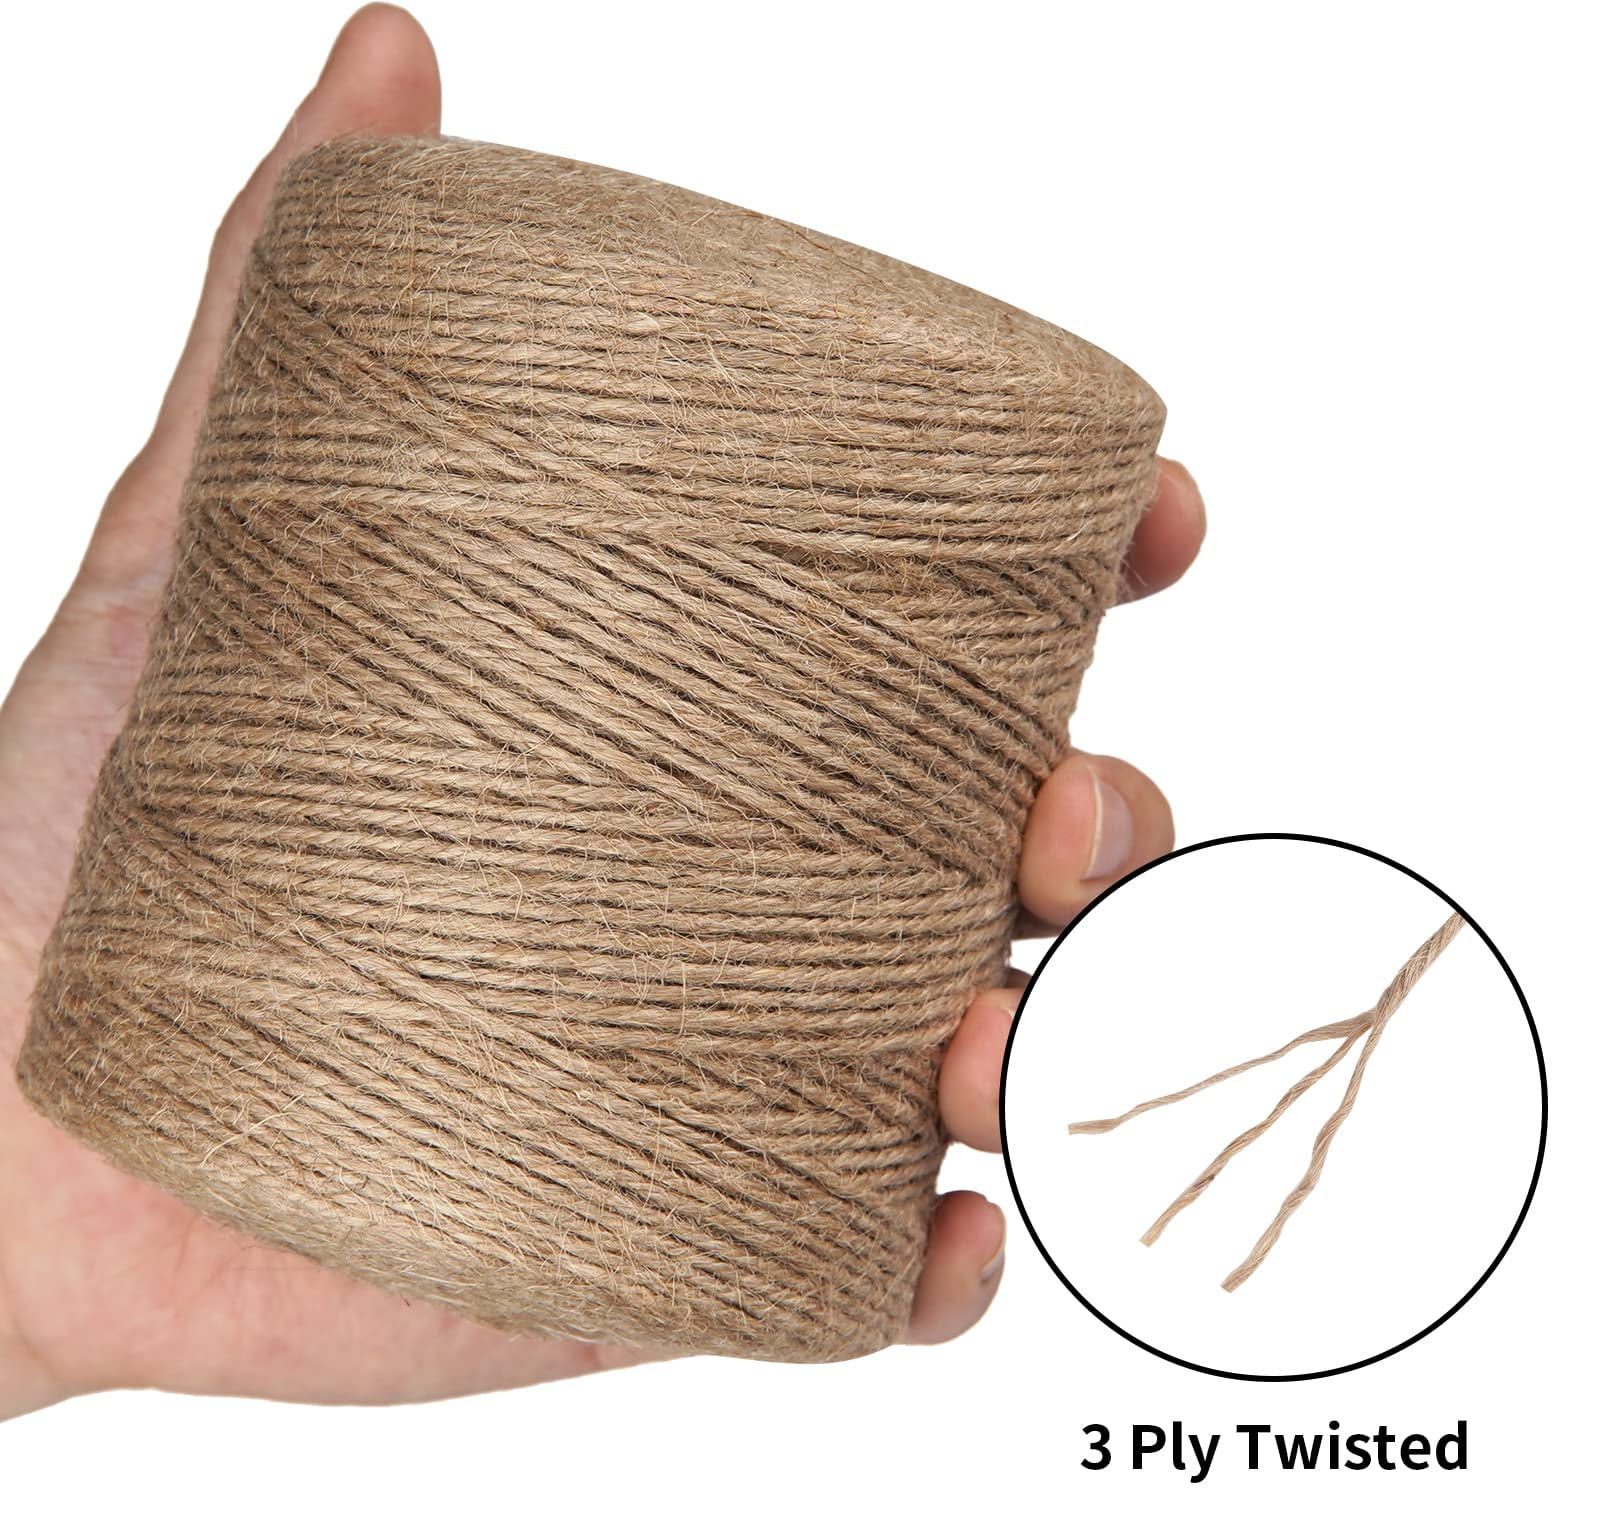 jijAcraft Natural Jute Twine 164 Feet - 4mm Thick Twine String Garden Twine  for Climbing Plants - Strong Brown Hemp Twine String Durable Rope Ribbon